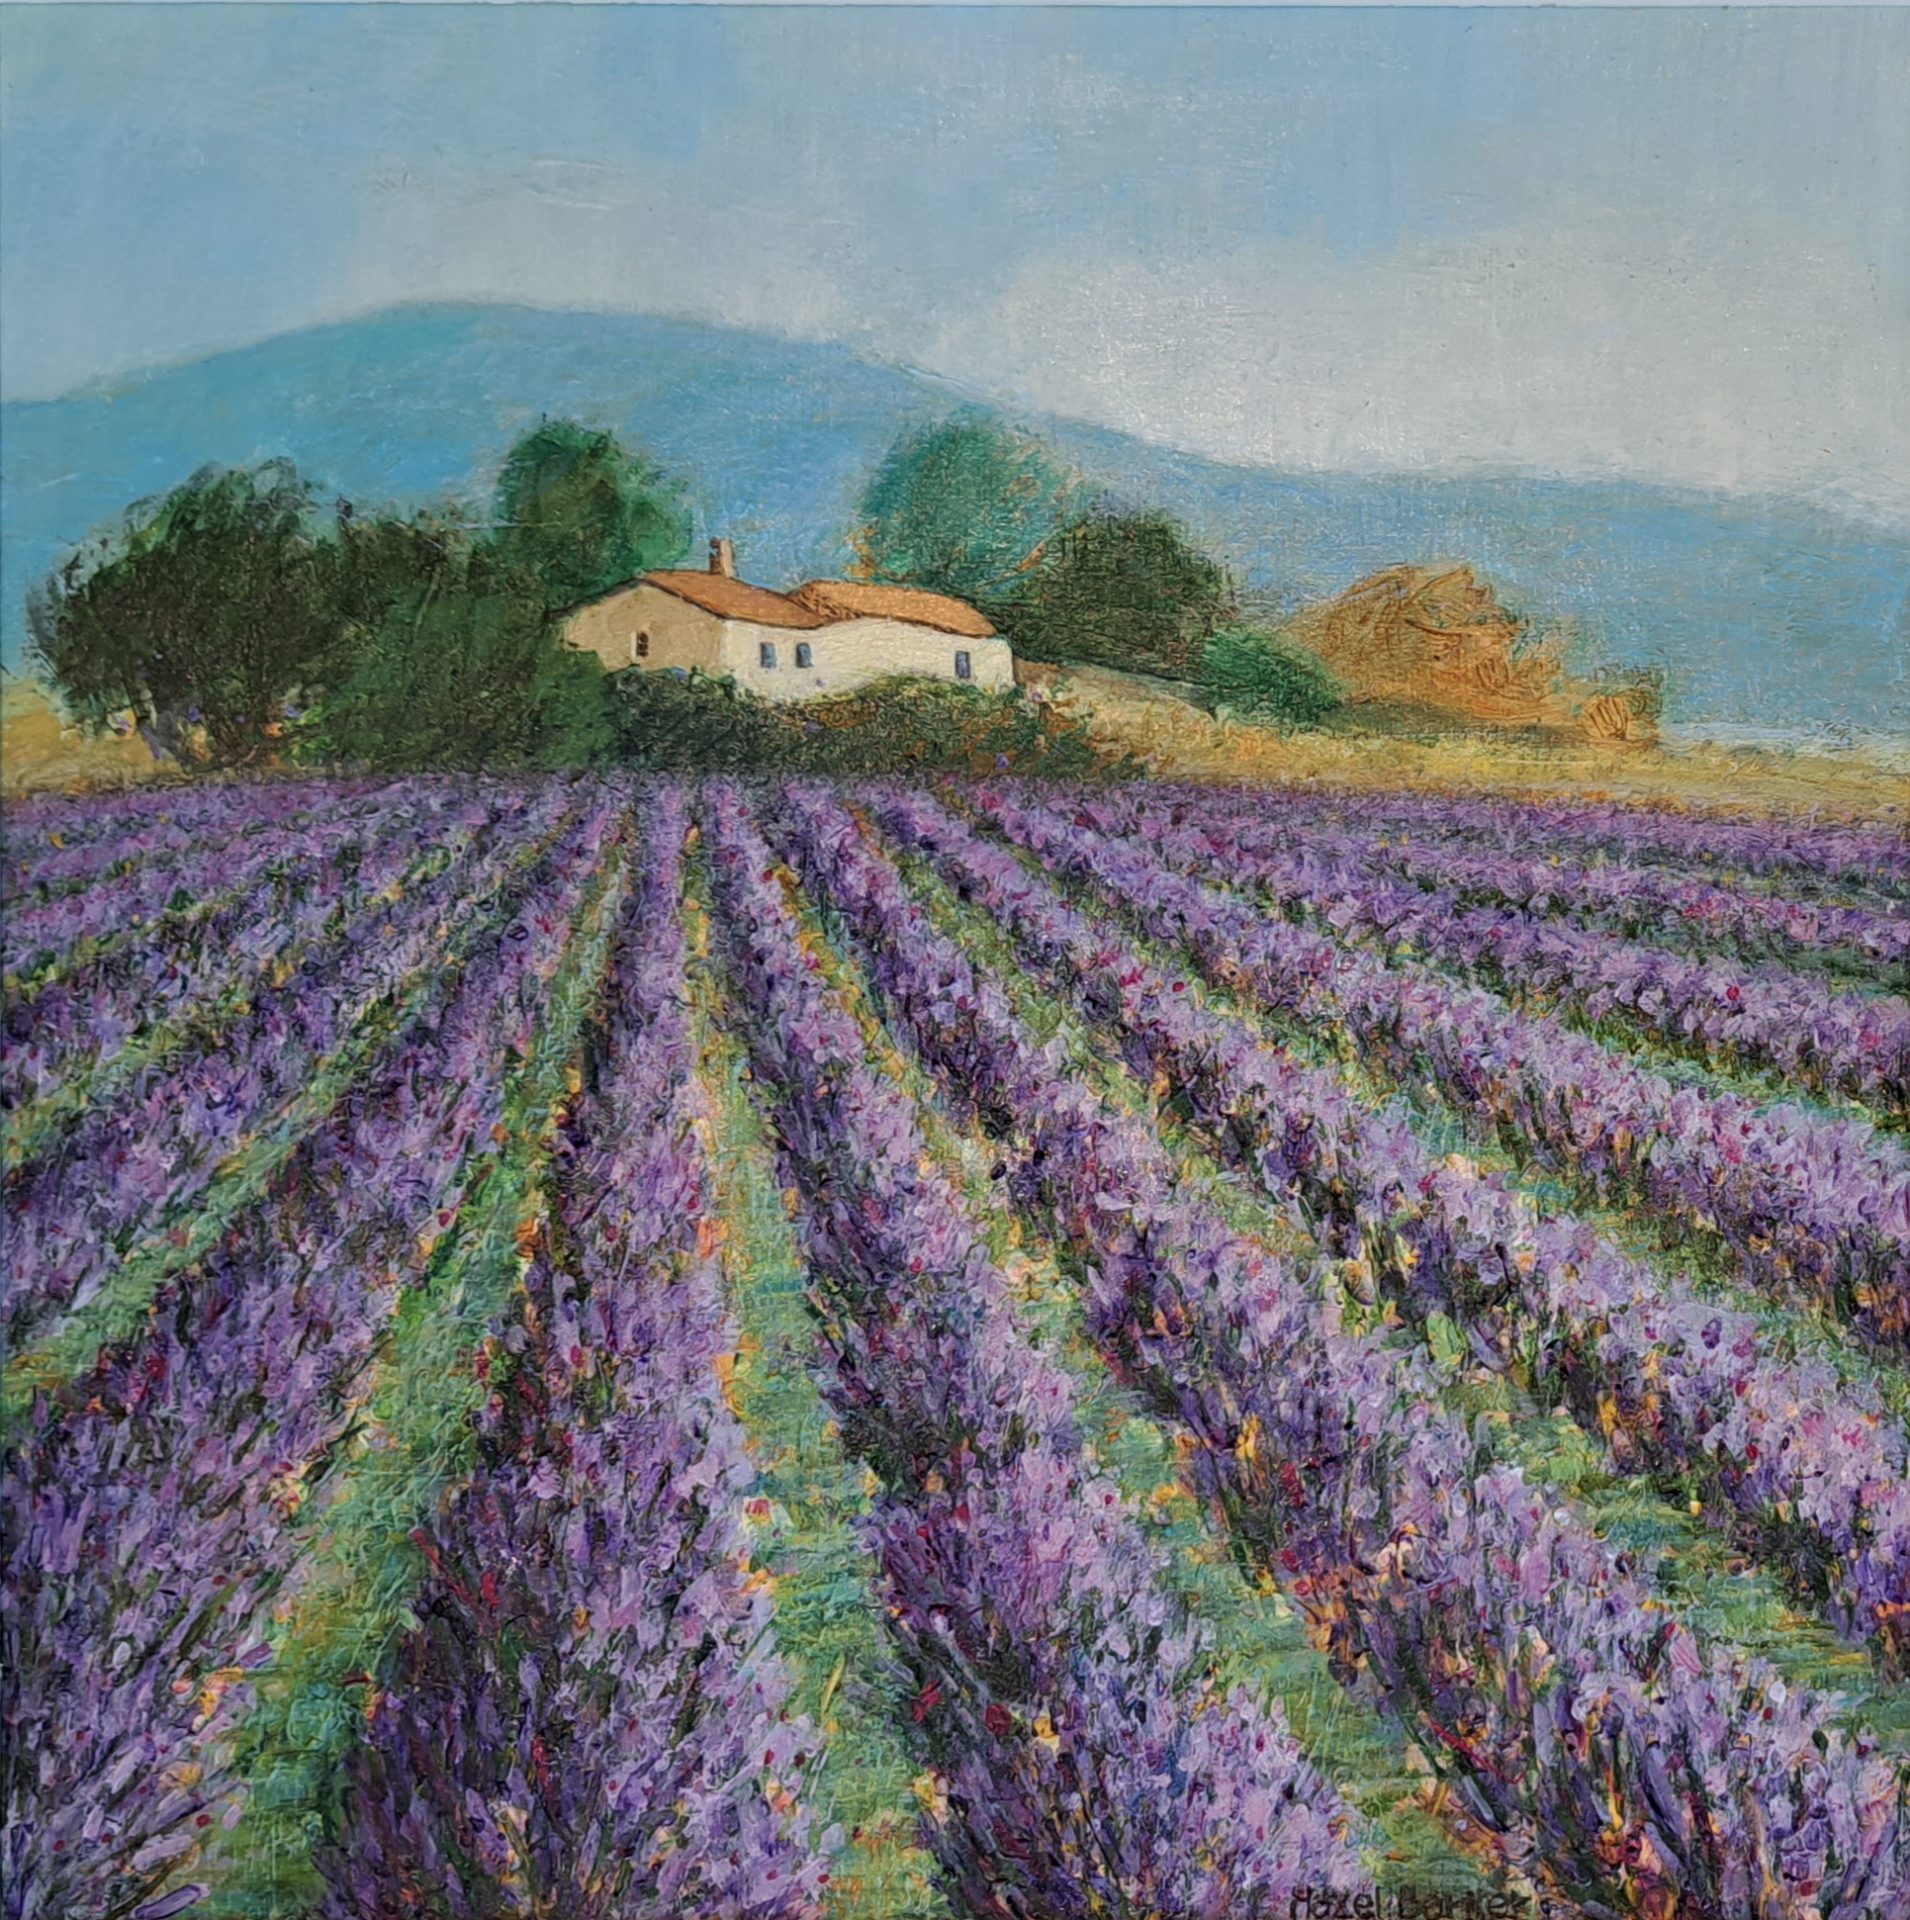 Hazel Barker Lavender Fi painting lilac light purple floral meadow painting with building in traditional Mediterranean landscape scene